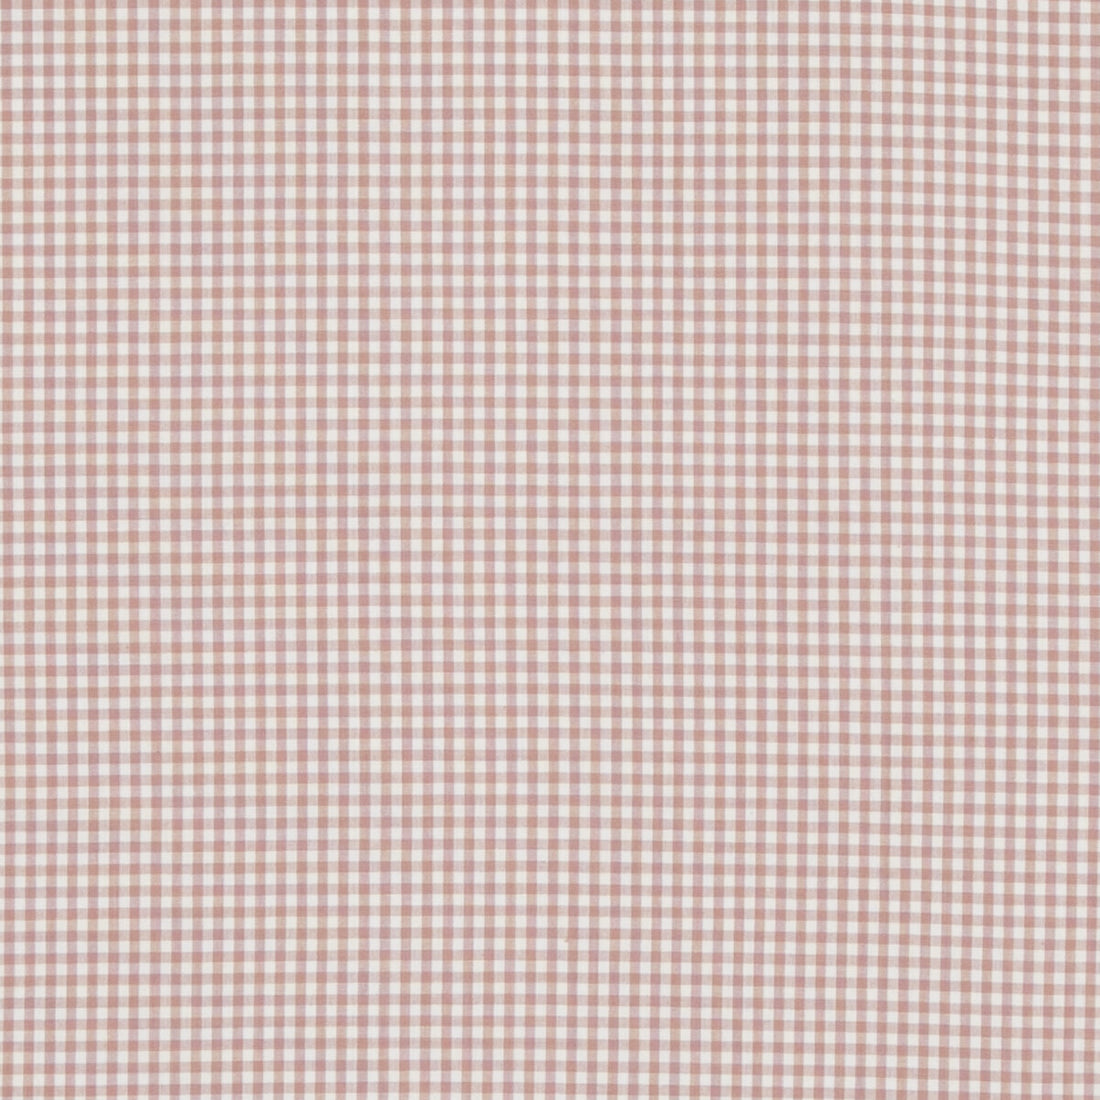 Sherborne Gingham fabric in pink color - pattern PF50506.404.0 - by Baker Lifestyle in the Bridport collection